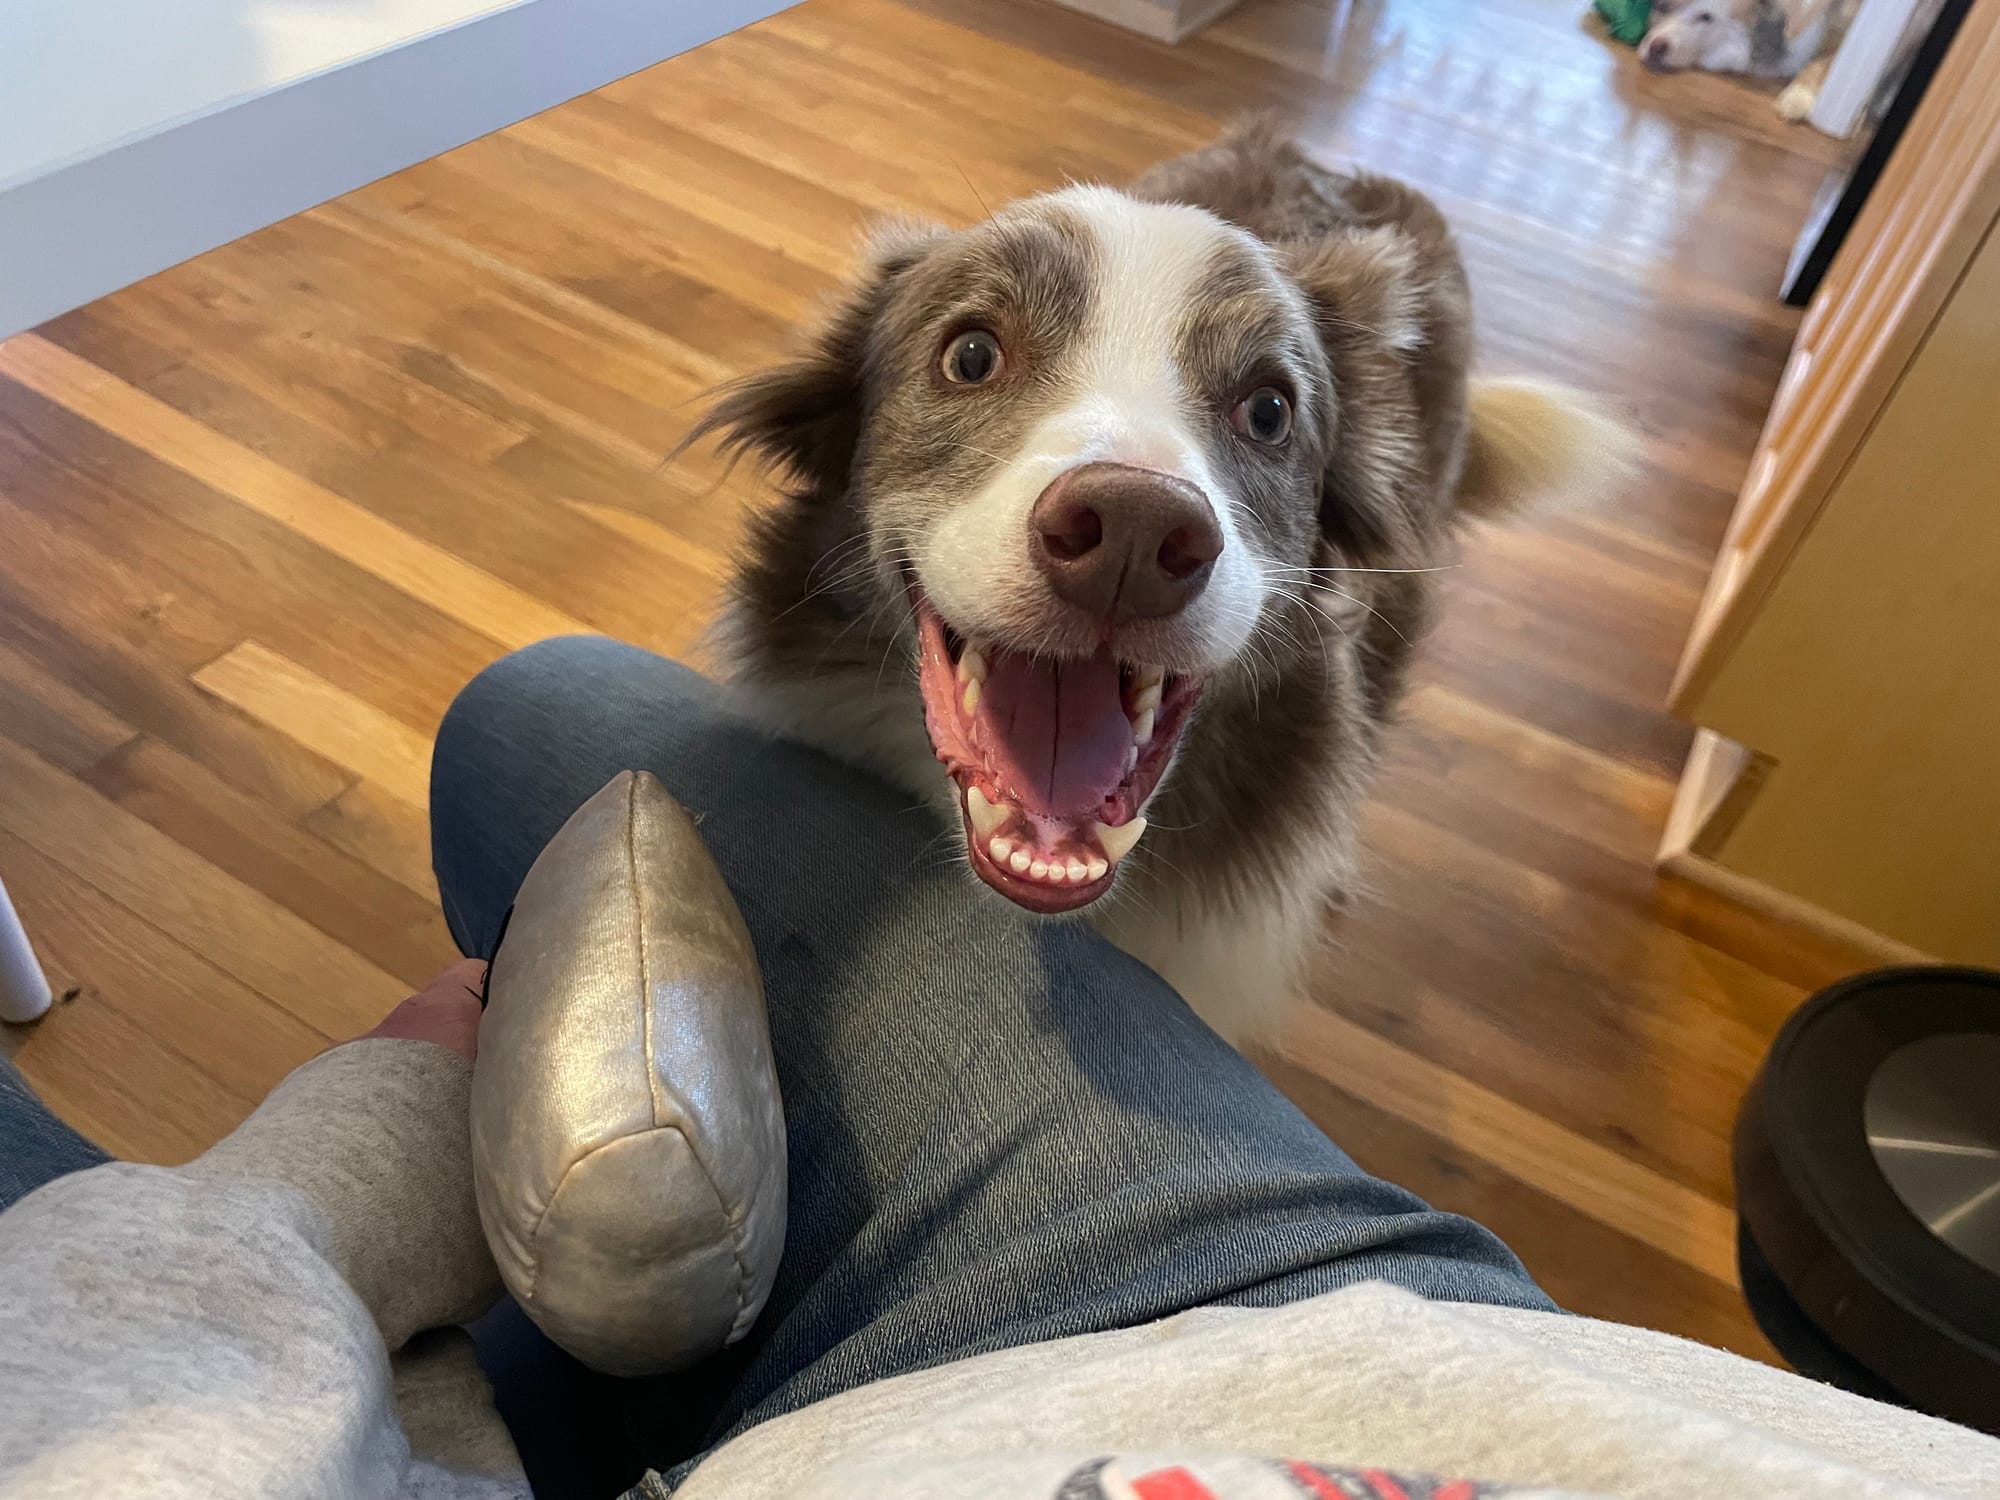 Brown and white border collie with a big smile looking at the camera.